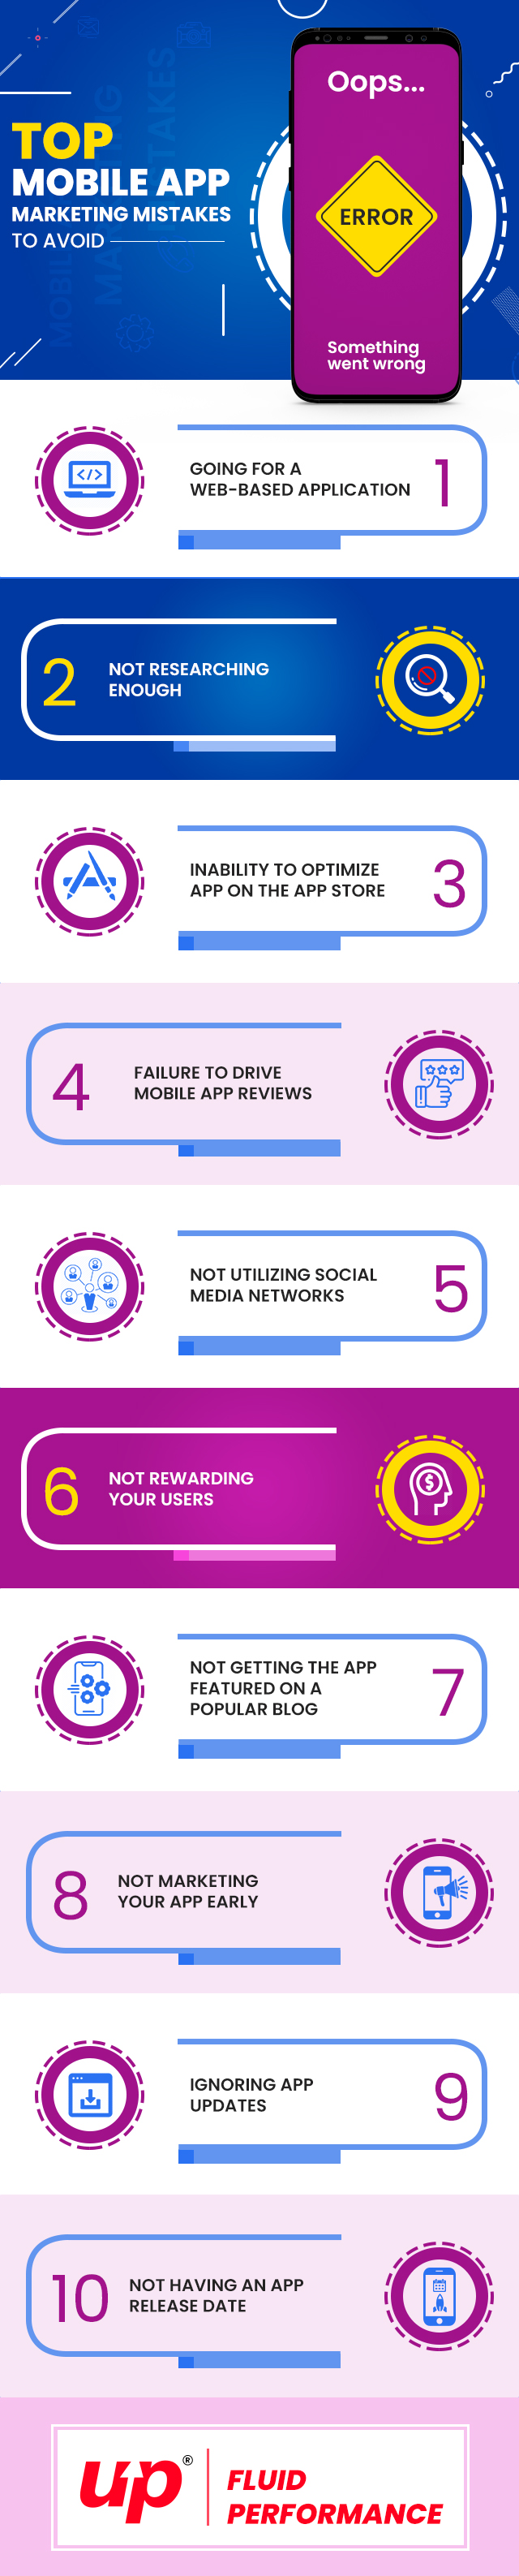 10 mobile application marketing mistakes